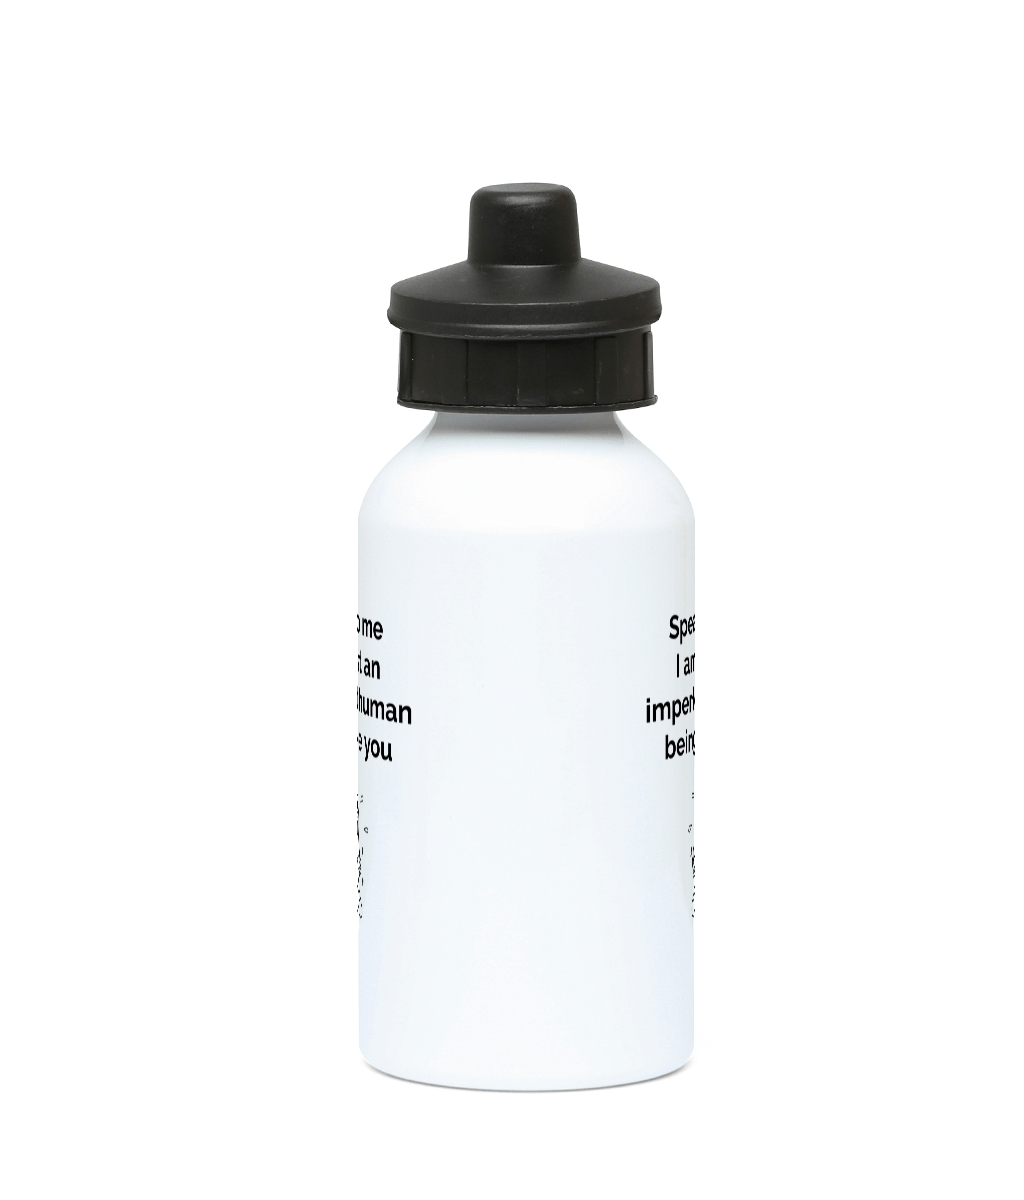 water bottle 400ml  speak to me I am just an imperfect human like you